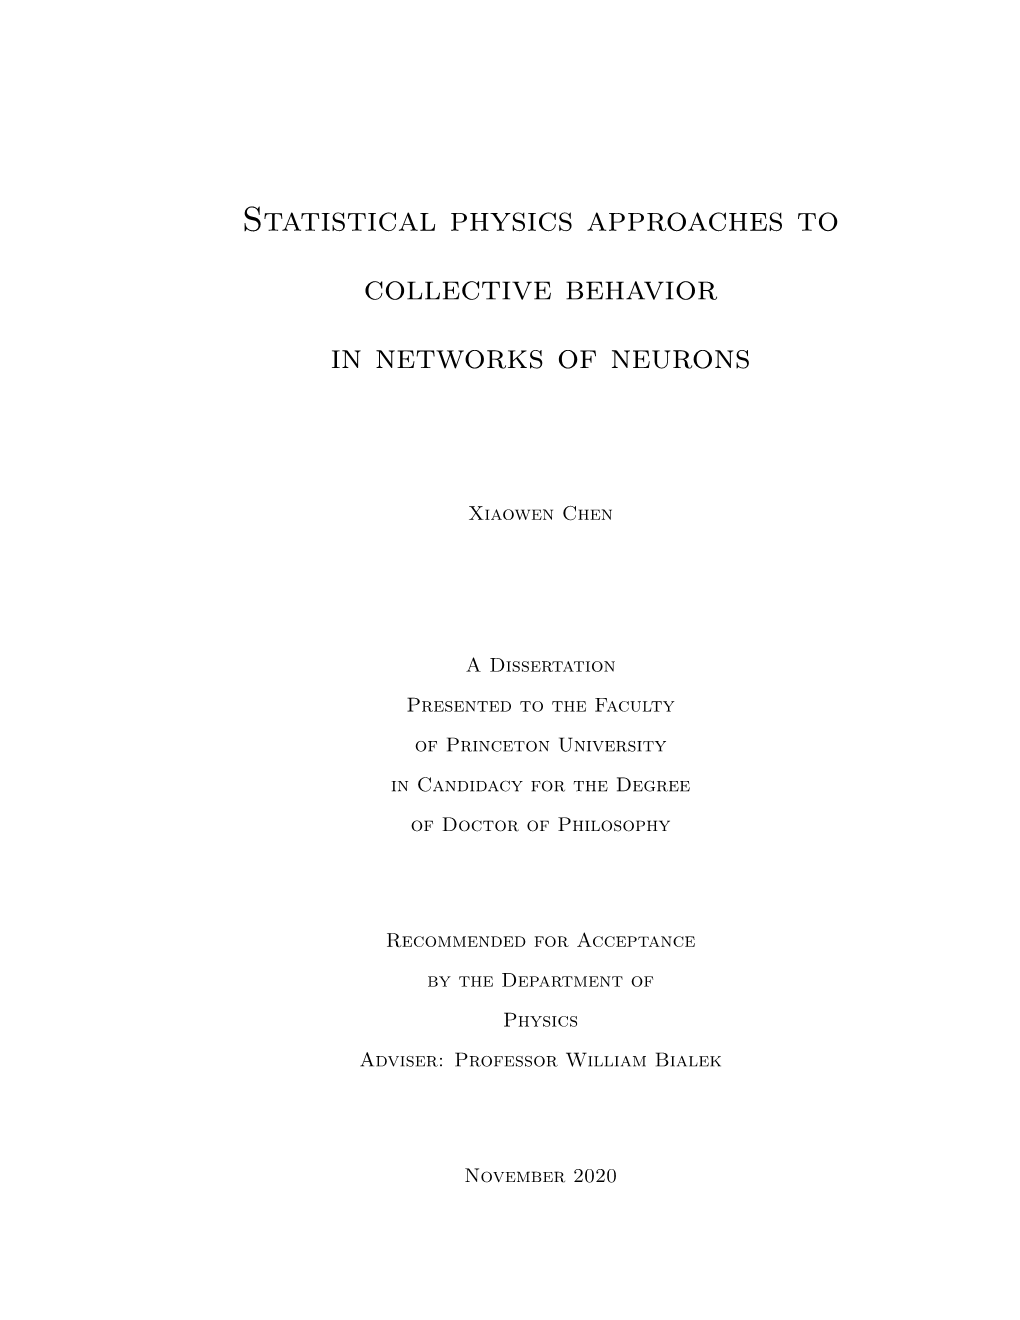 Statistical Physics Approaches to Collective Behavior in Networks of Neurons